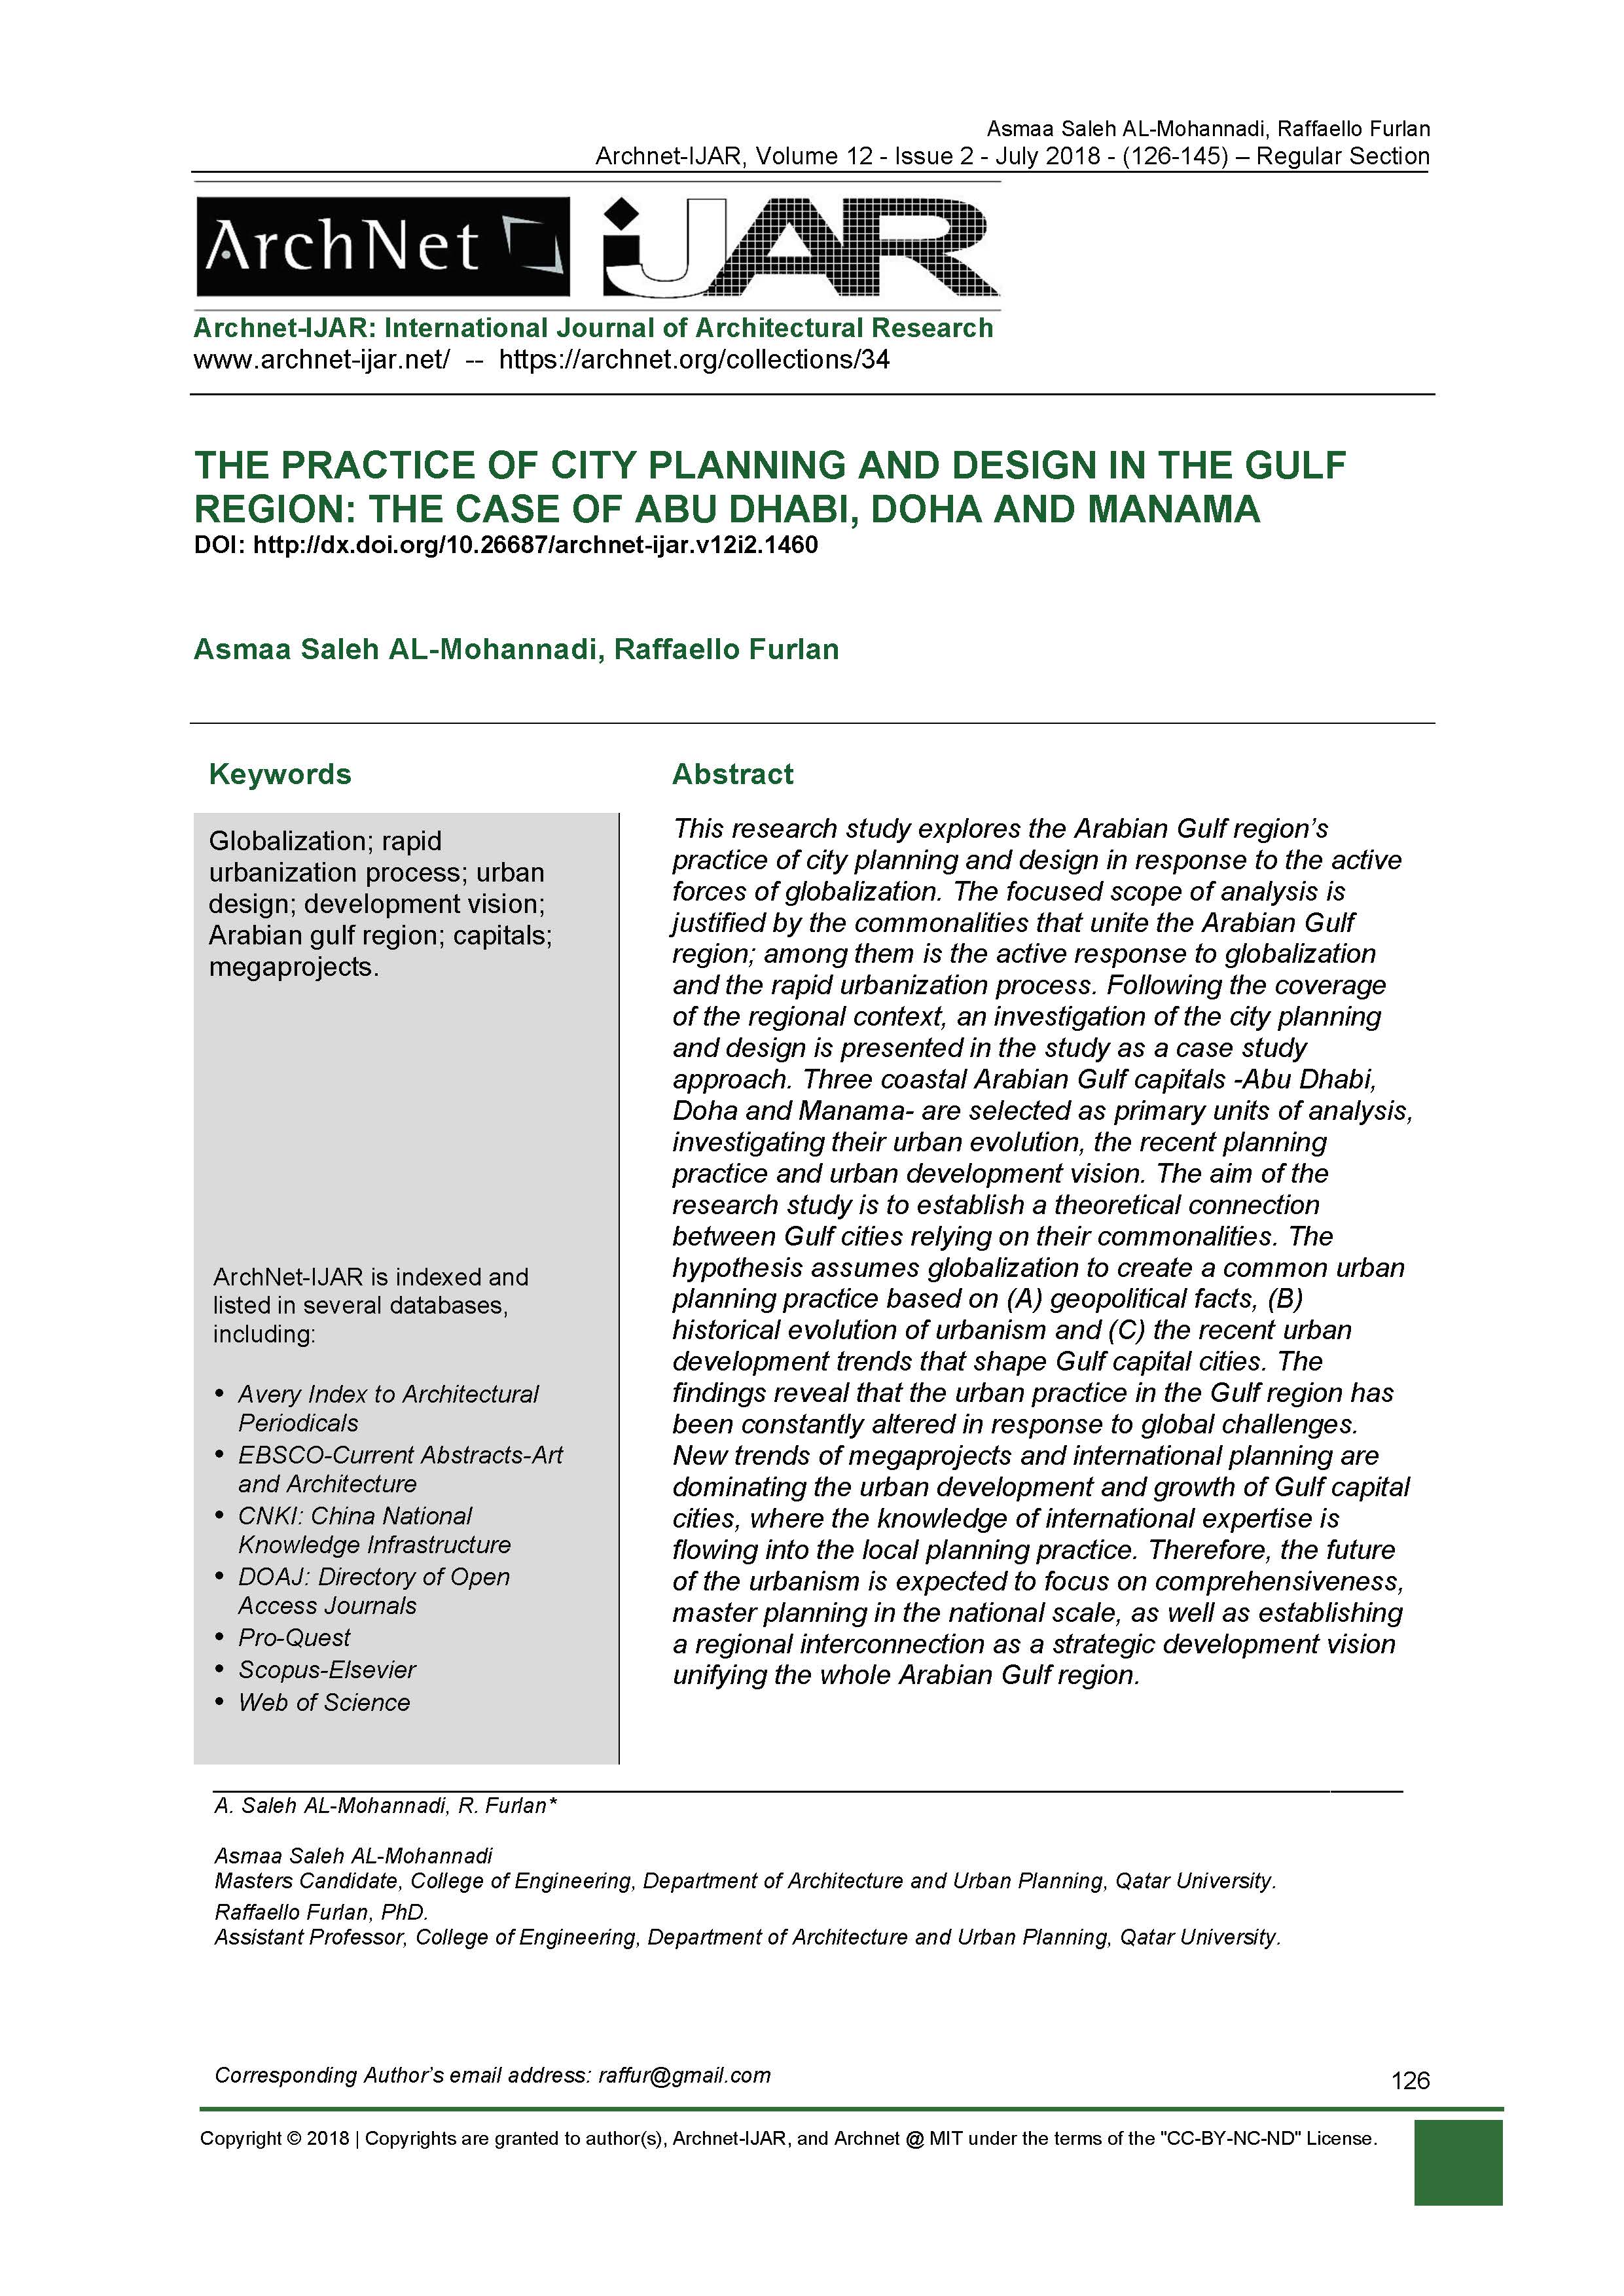 The Practice of City Planning and Design in the Gulf Region: The Case of Abu Dhabi, Doha and Manama